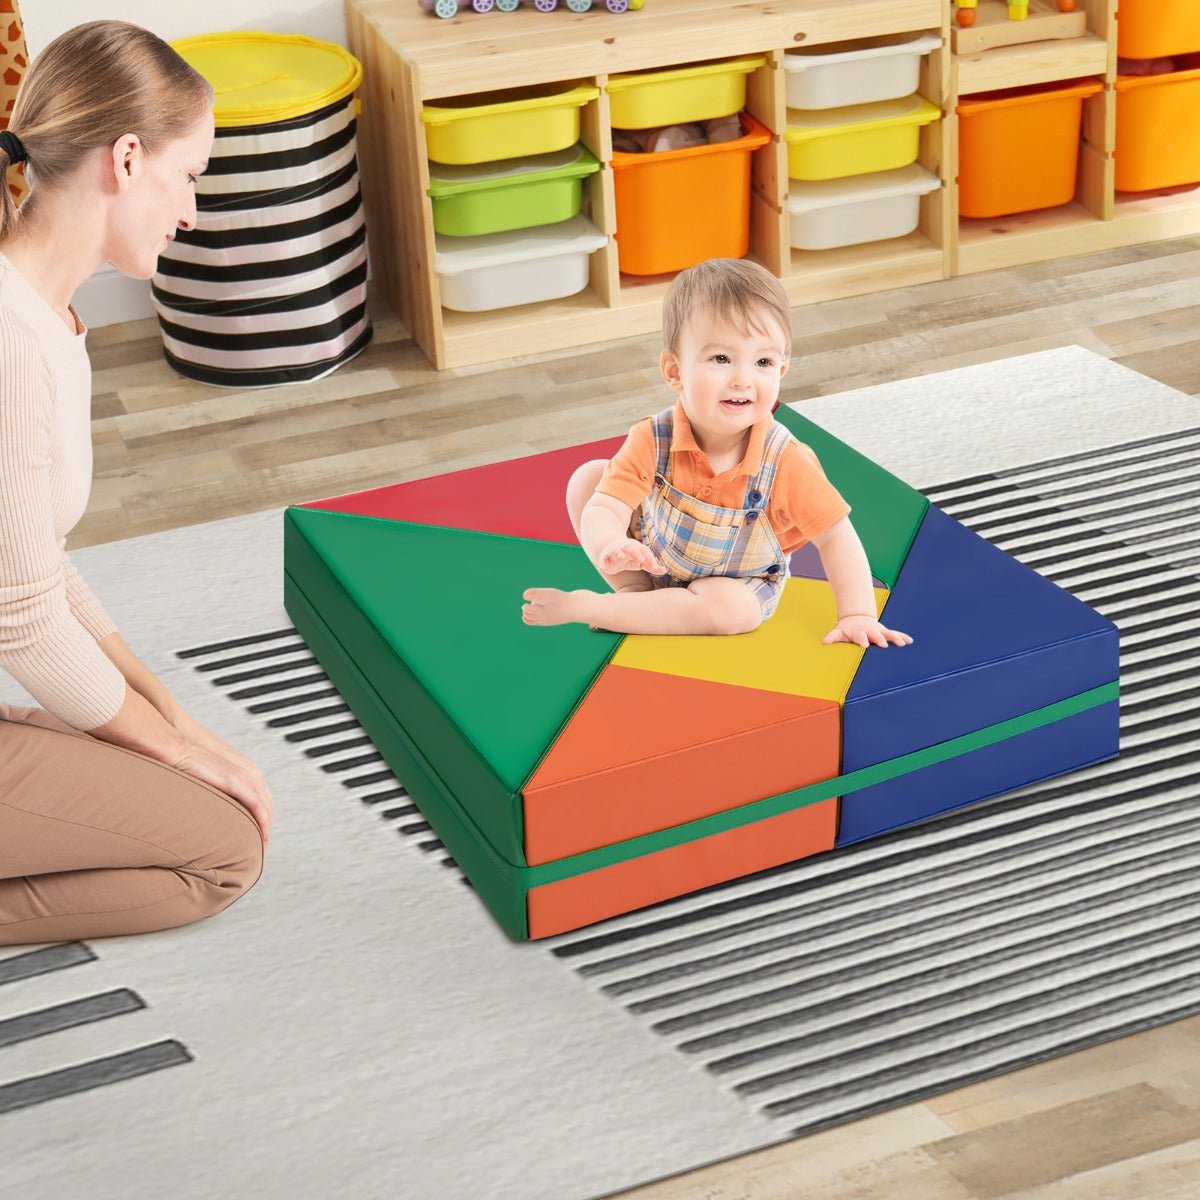 Safe and Stimulating: 7-Piece Blocks for Toddler's Play and Exploration